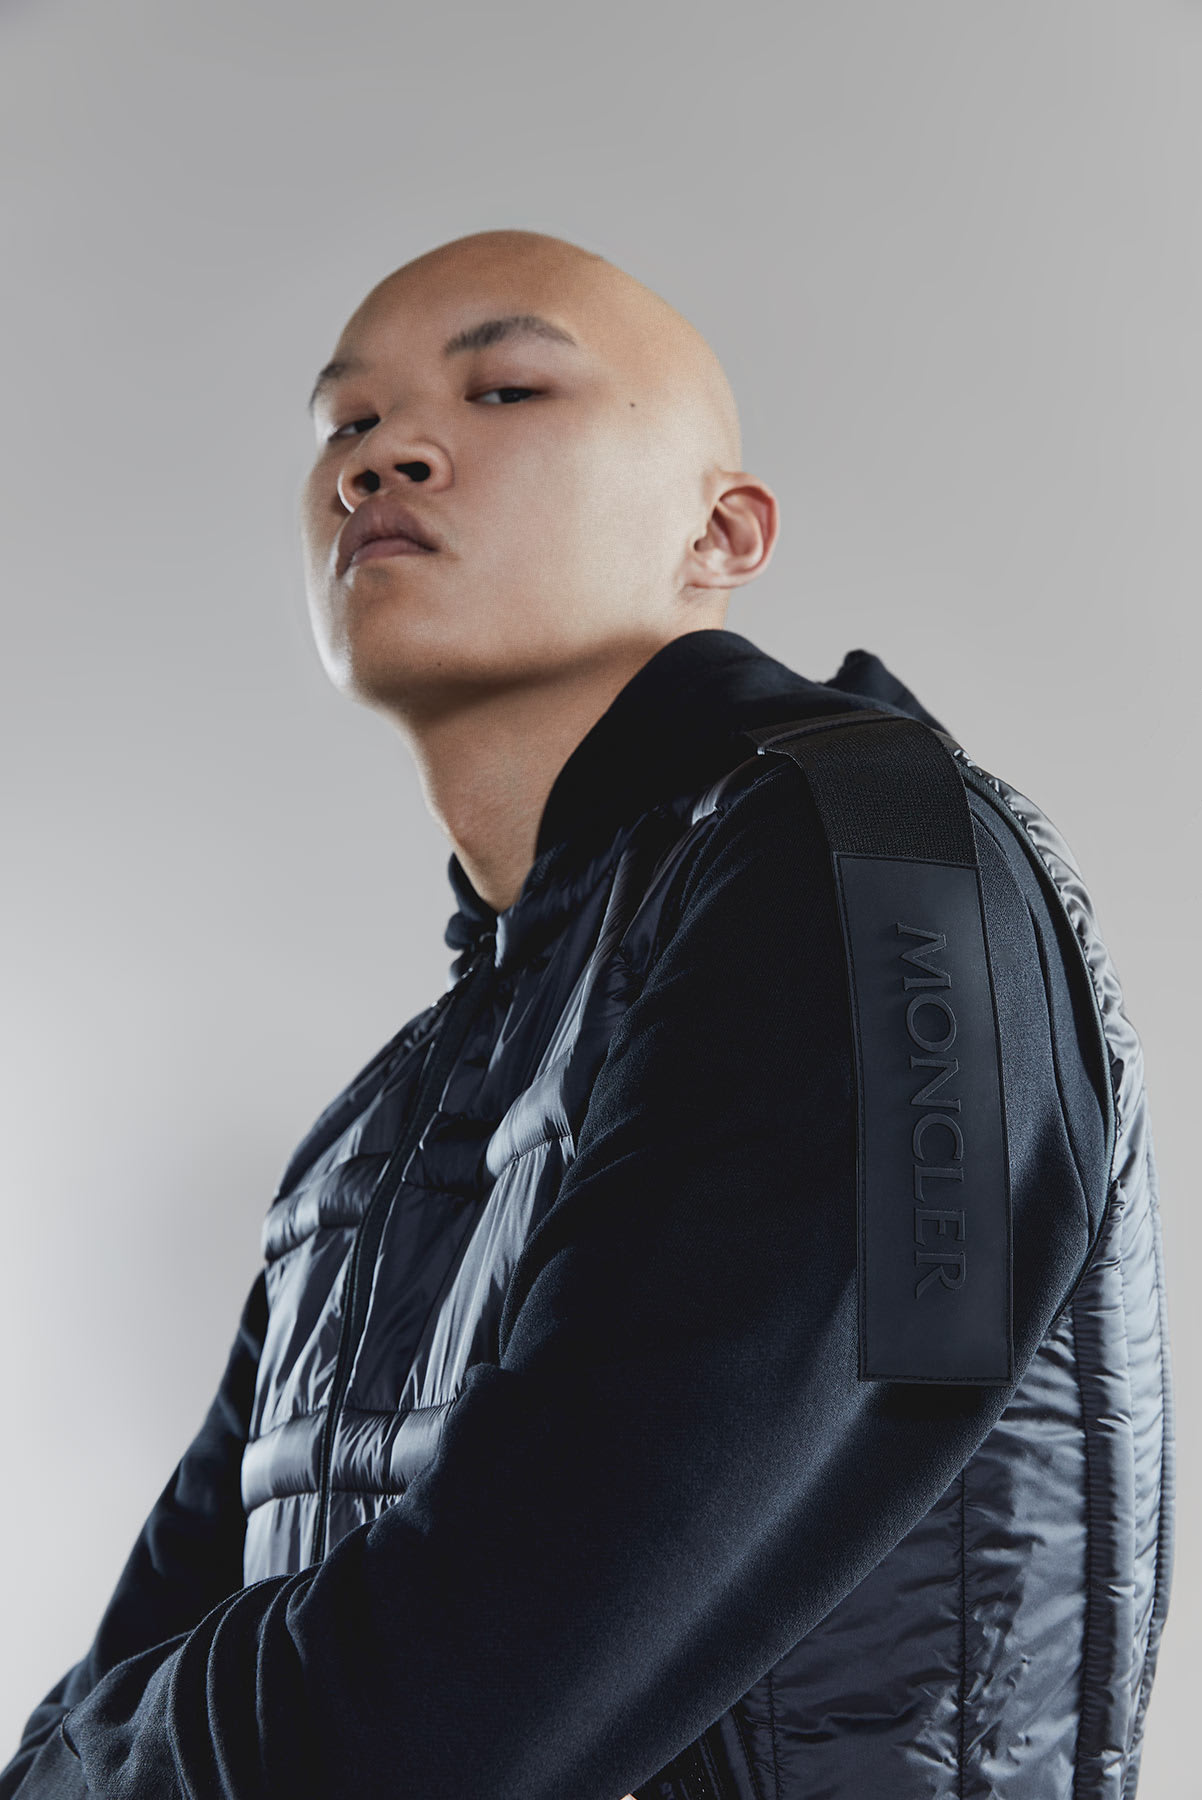 Moncler Genius - 5 Moncler Craig Green SS19 - Coming Soon to END